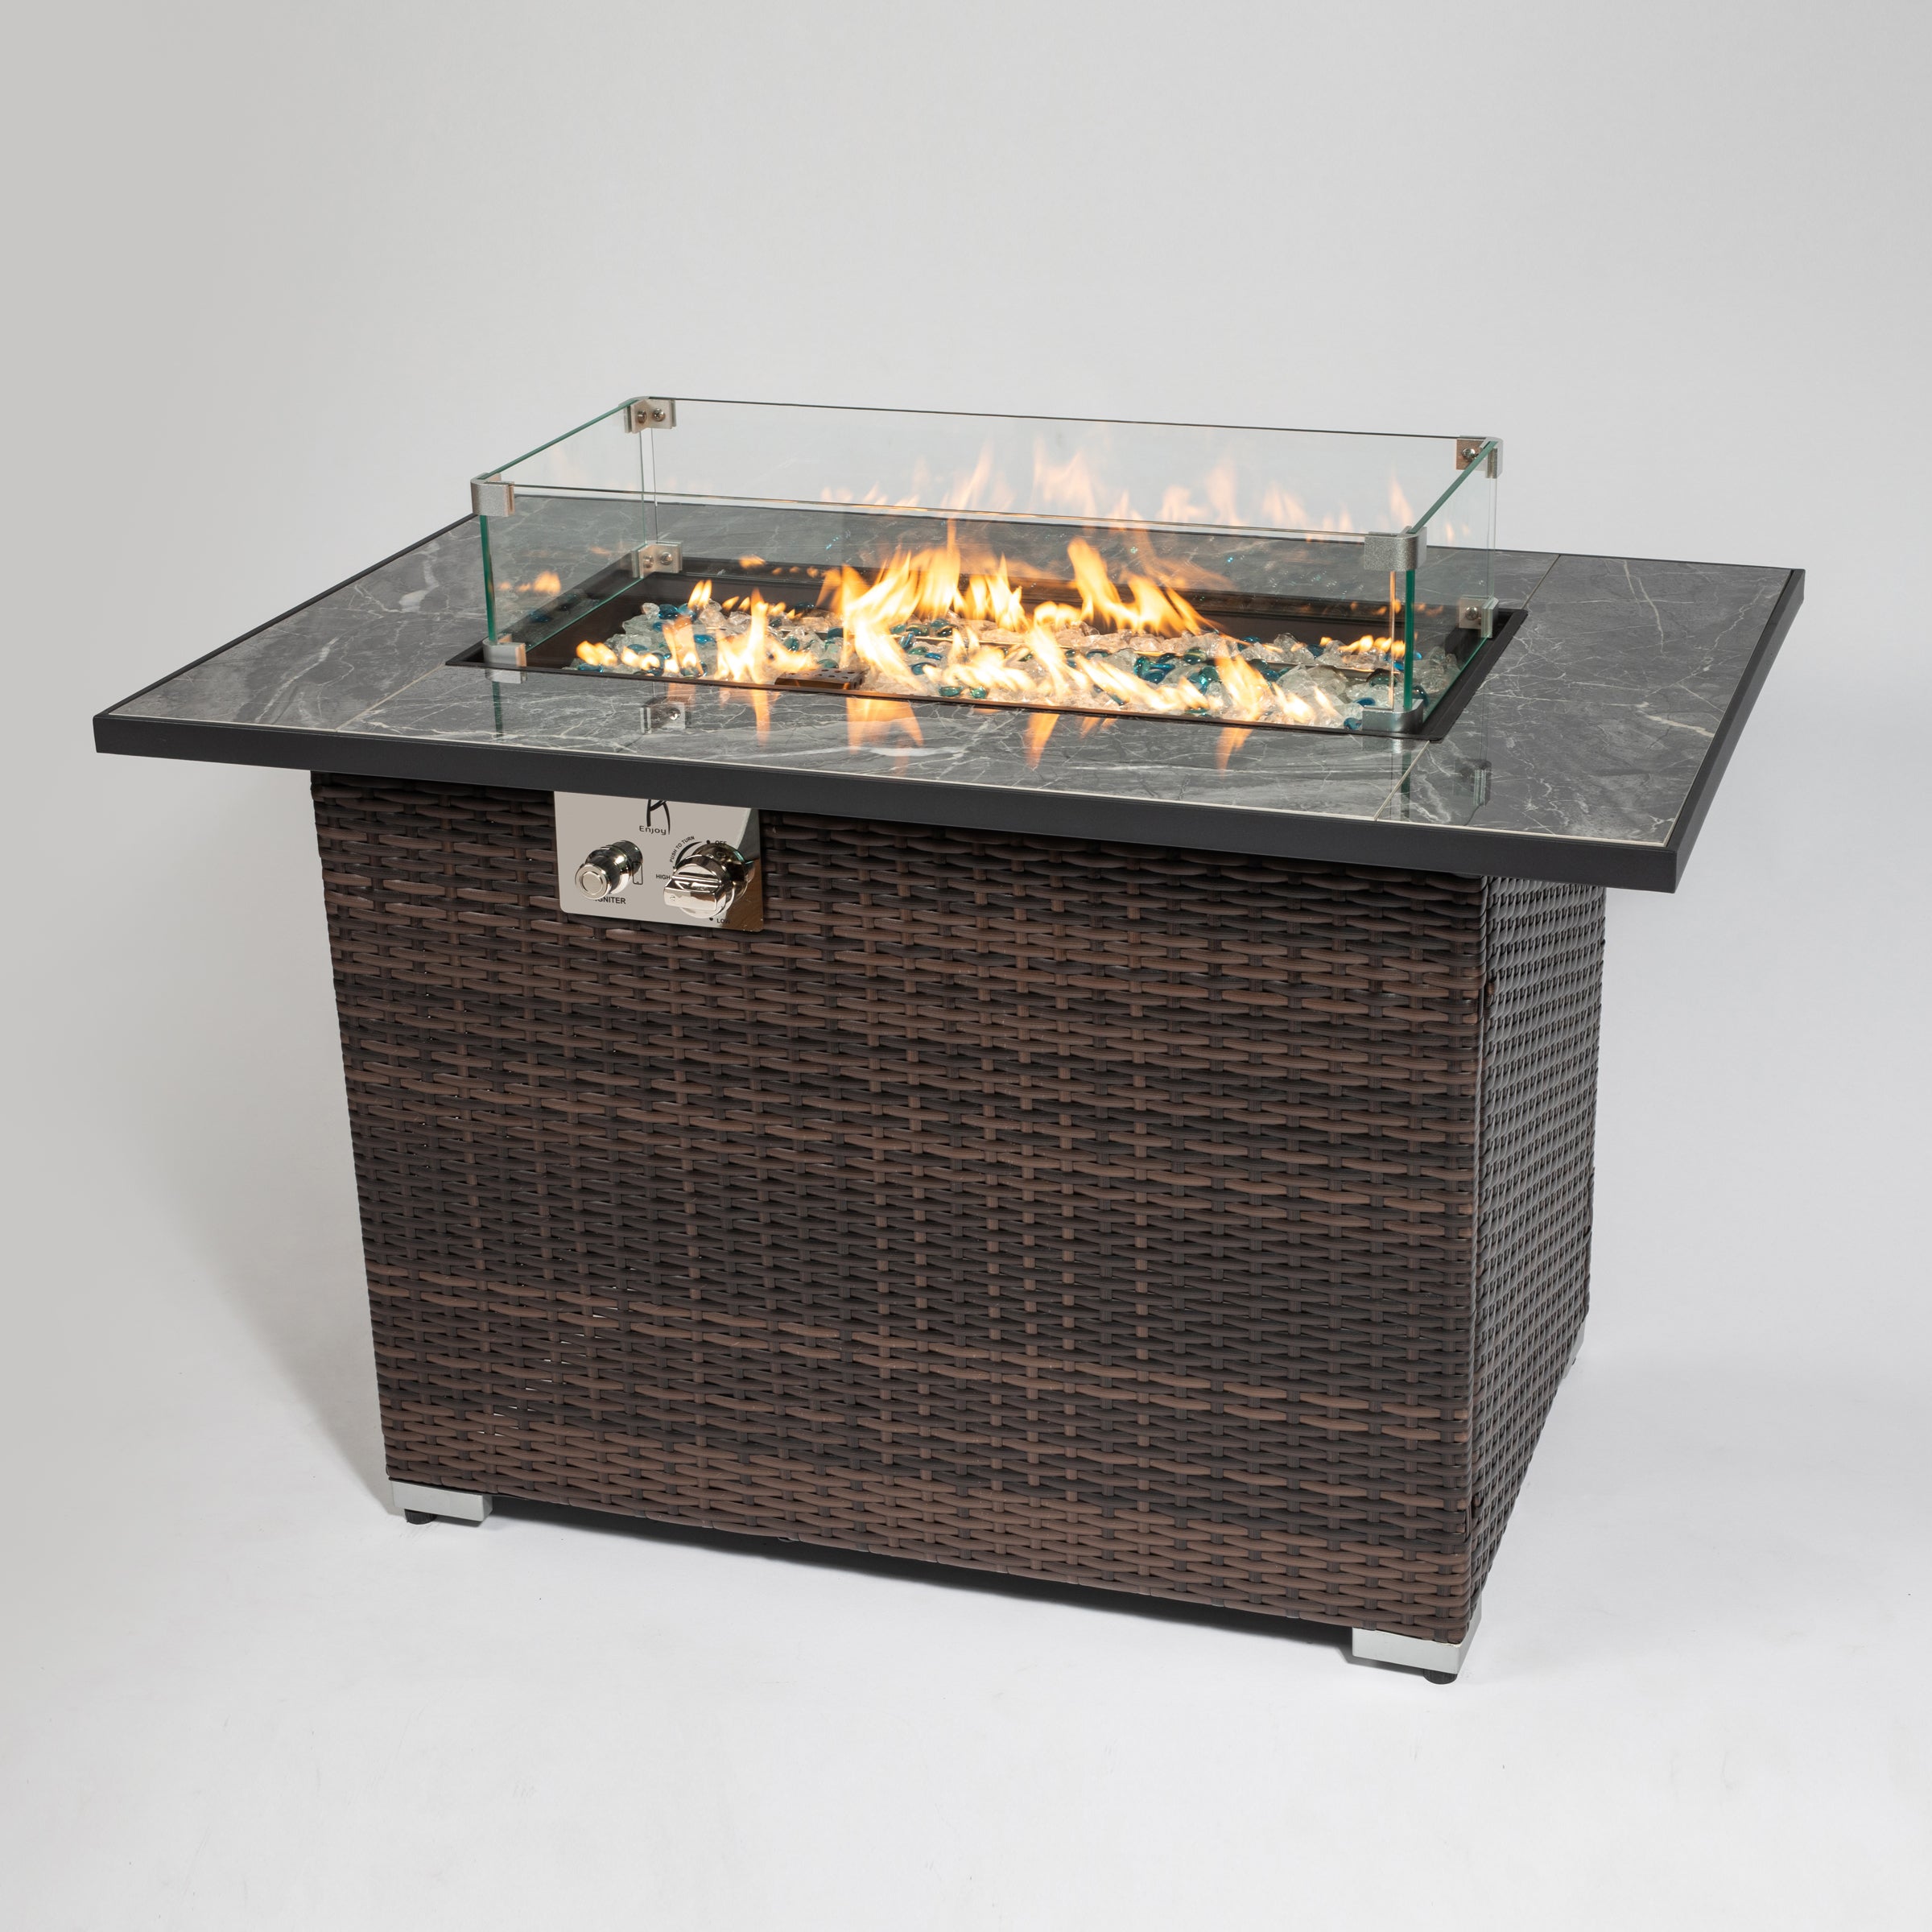 44inch Outdoor Propane Fire Pit Table with Ceramic Tabletop, Dust Cover, Glass Beads